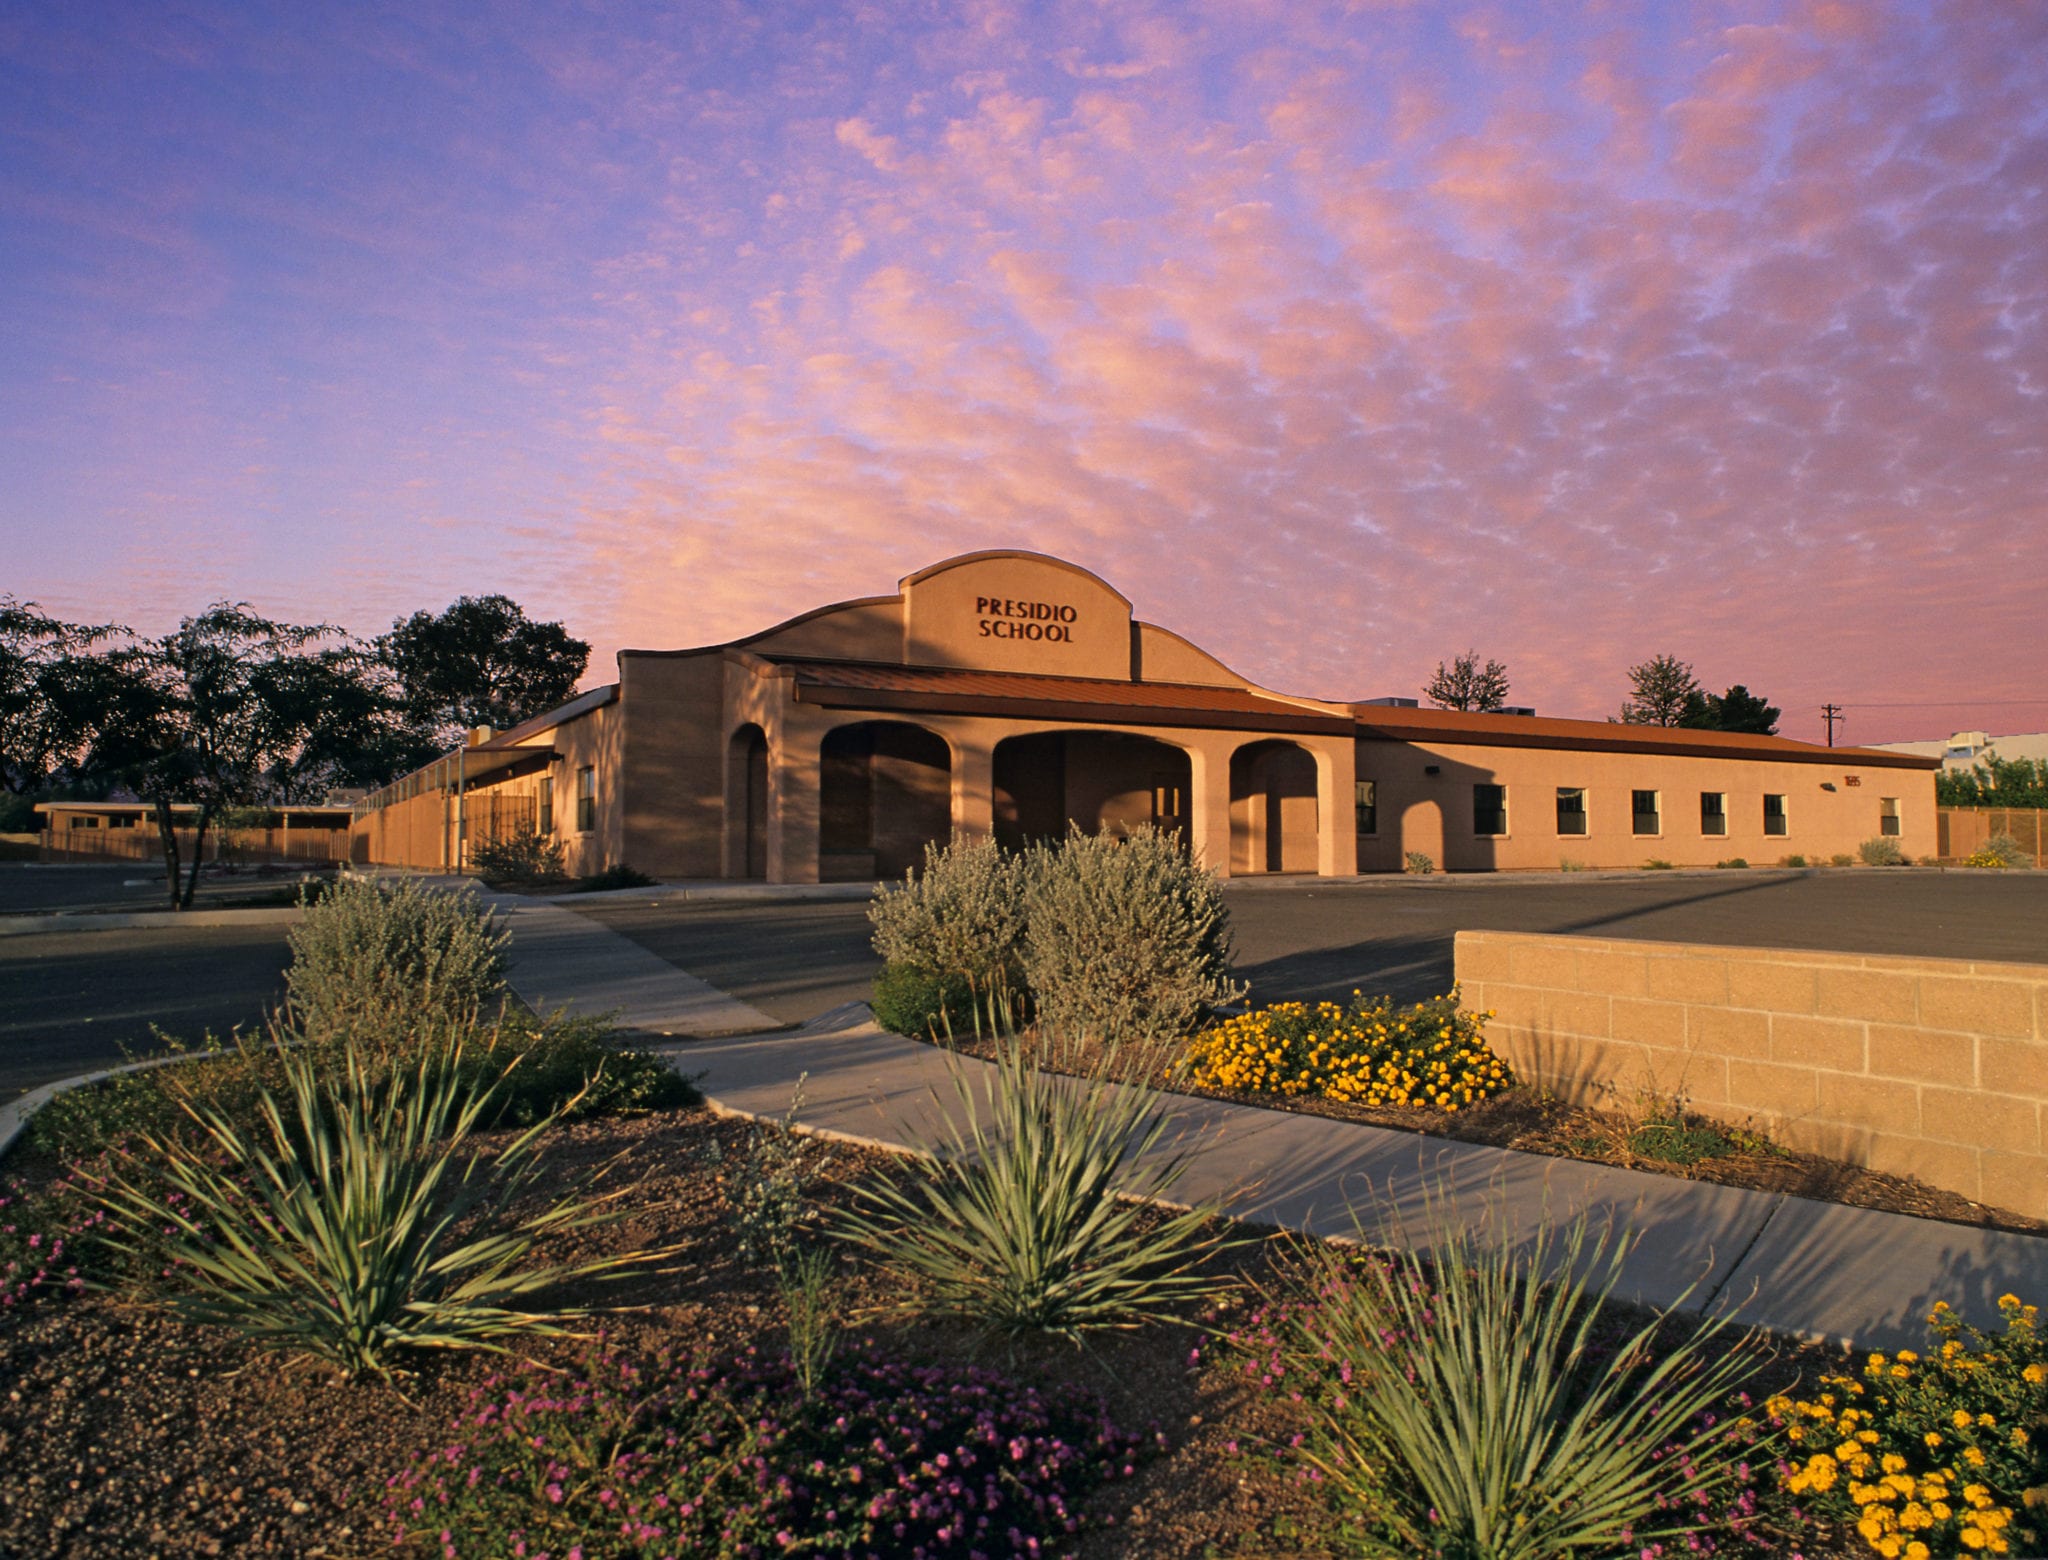 school front office and parking lot at sunset